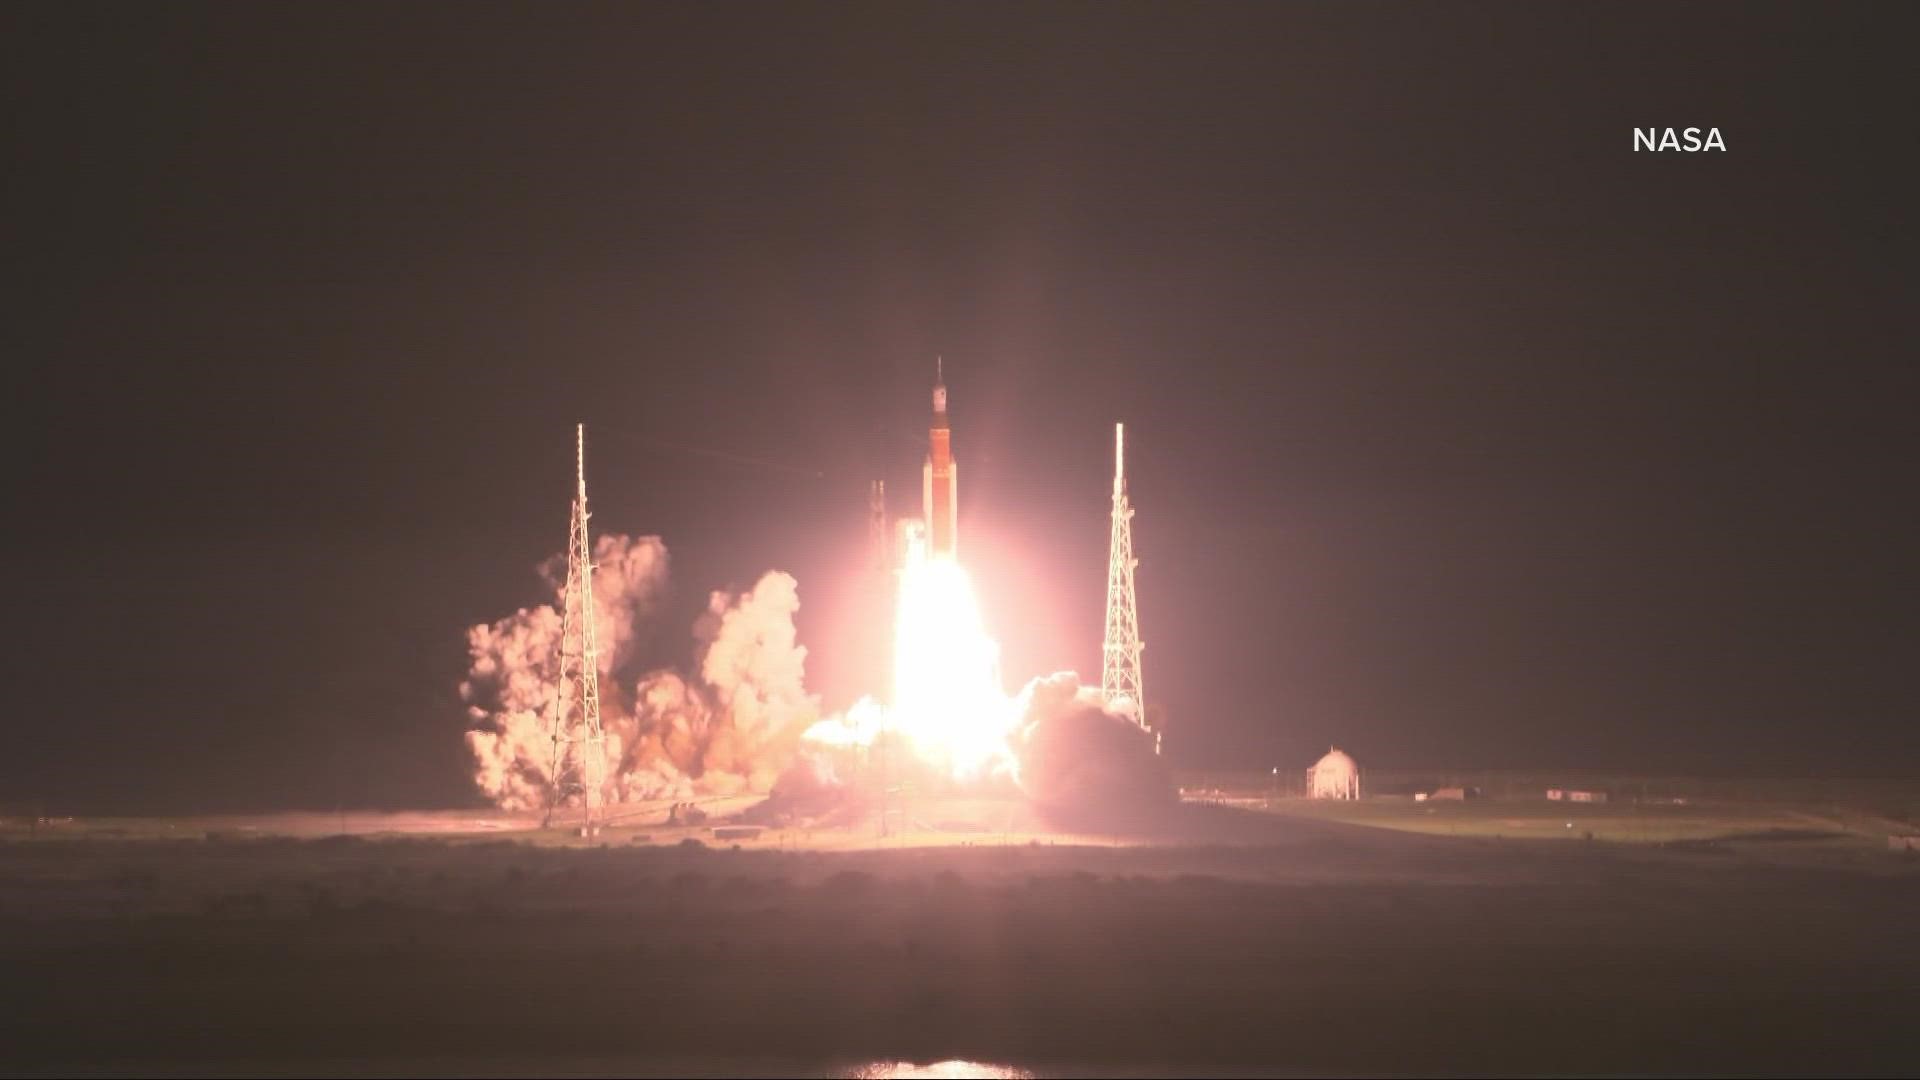 The nearly monthlong $4 billion mission has been grounded since August by fuel leaks and Hurricane Ian, which forced the rocket back into its hangar for shelter.